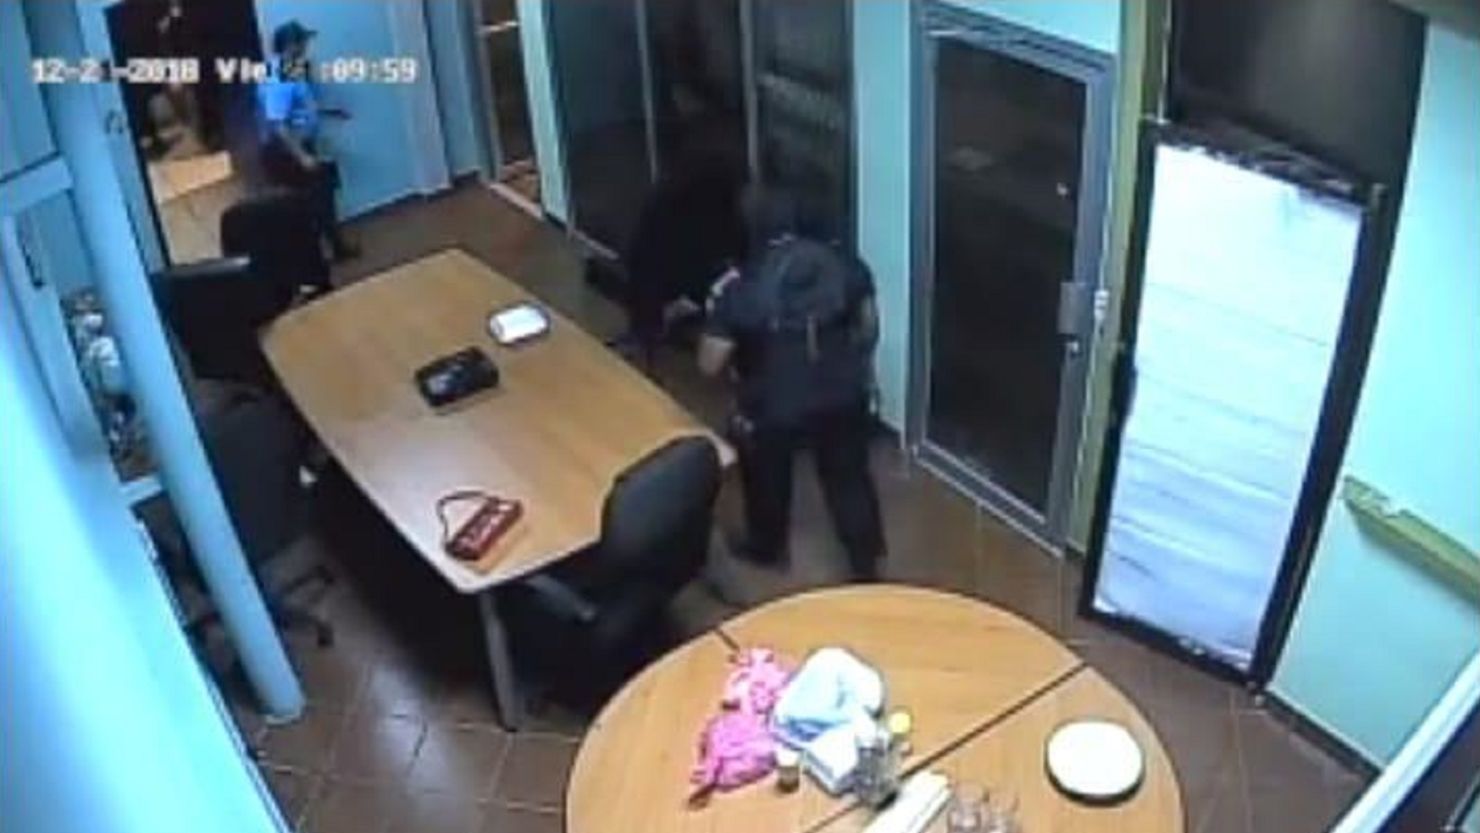 Security camera footage shows law enforcement walking inside the TV station Friday night.